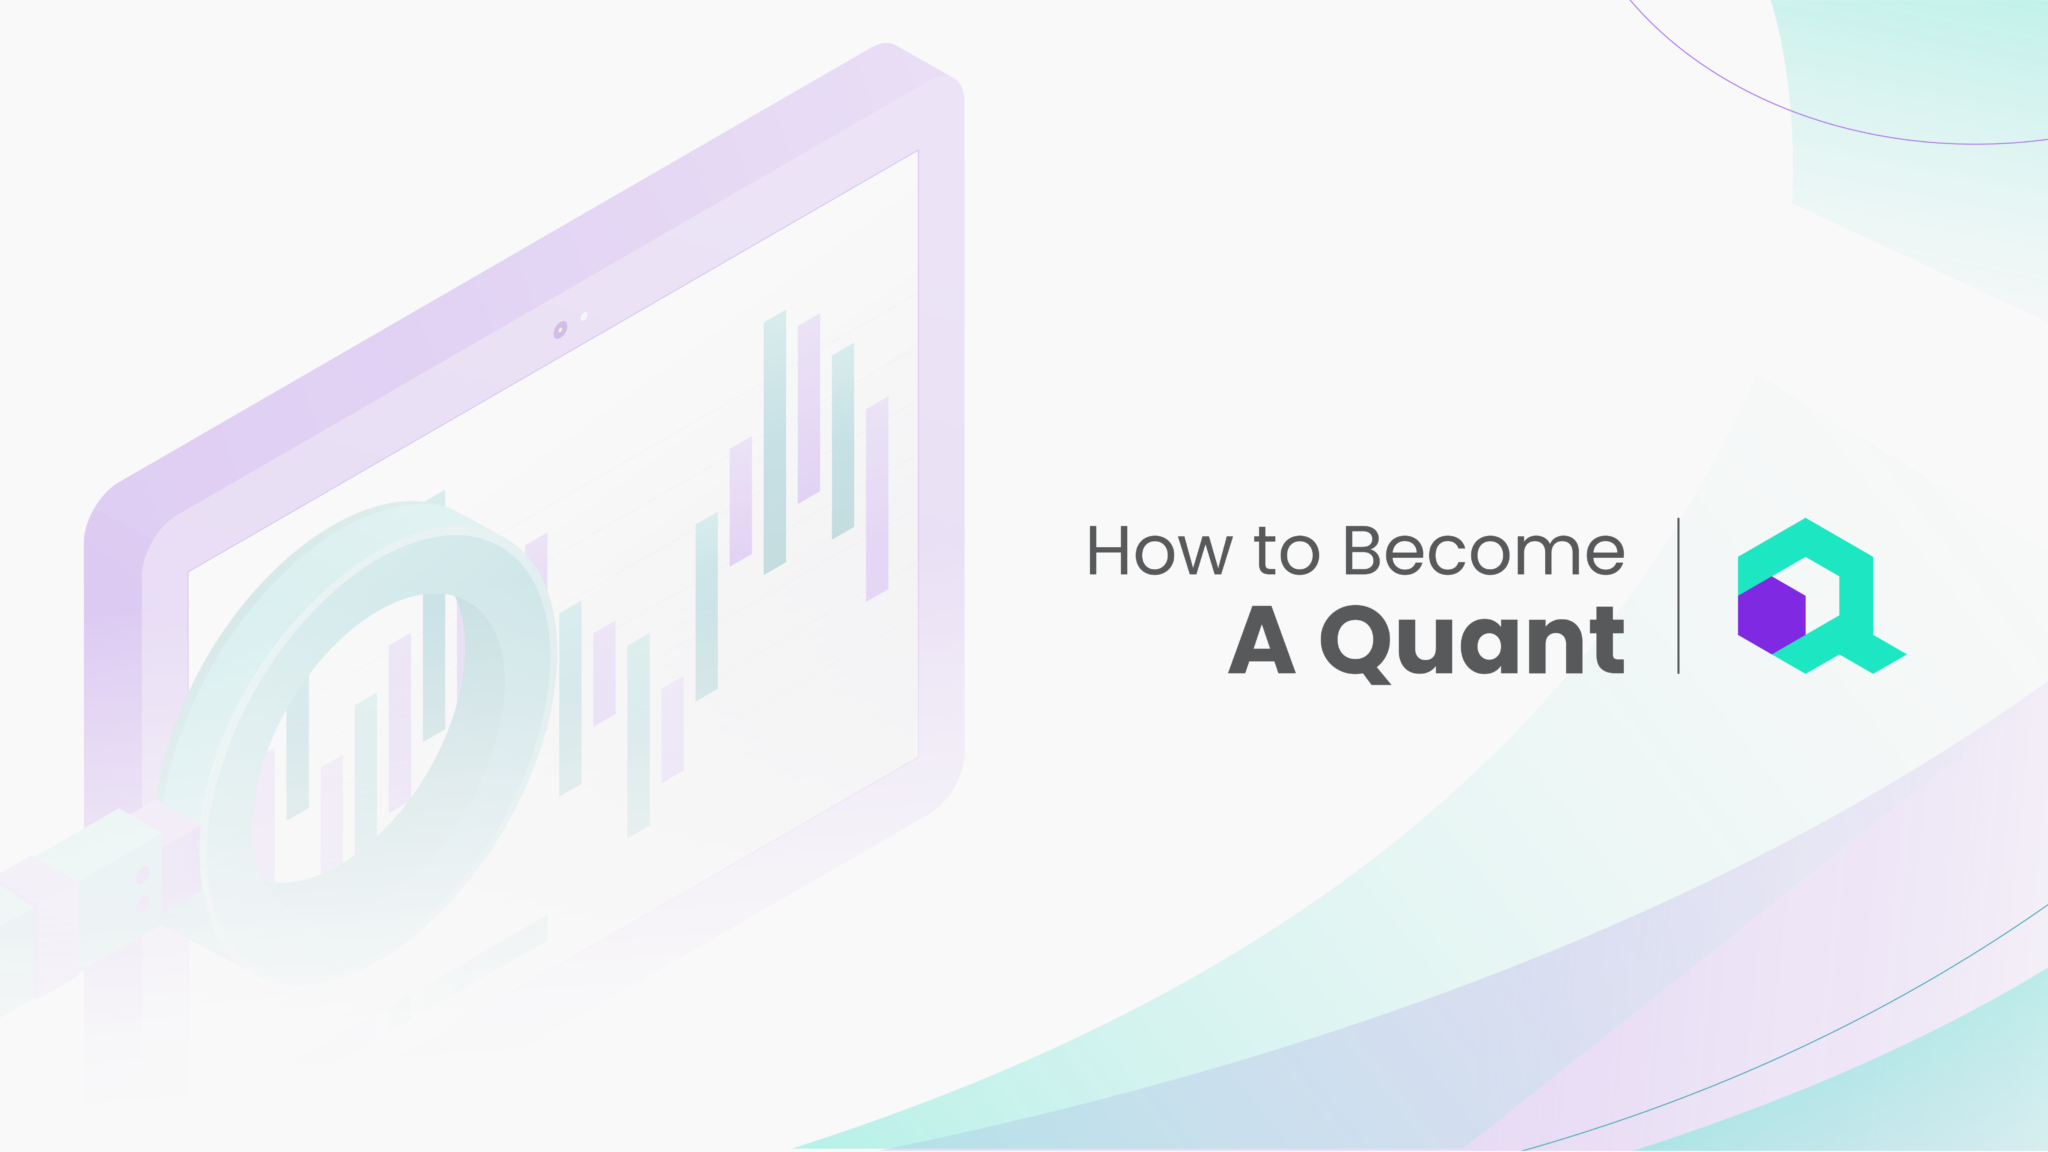 How to Become a Quant : Step by Step